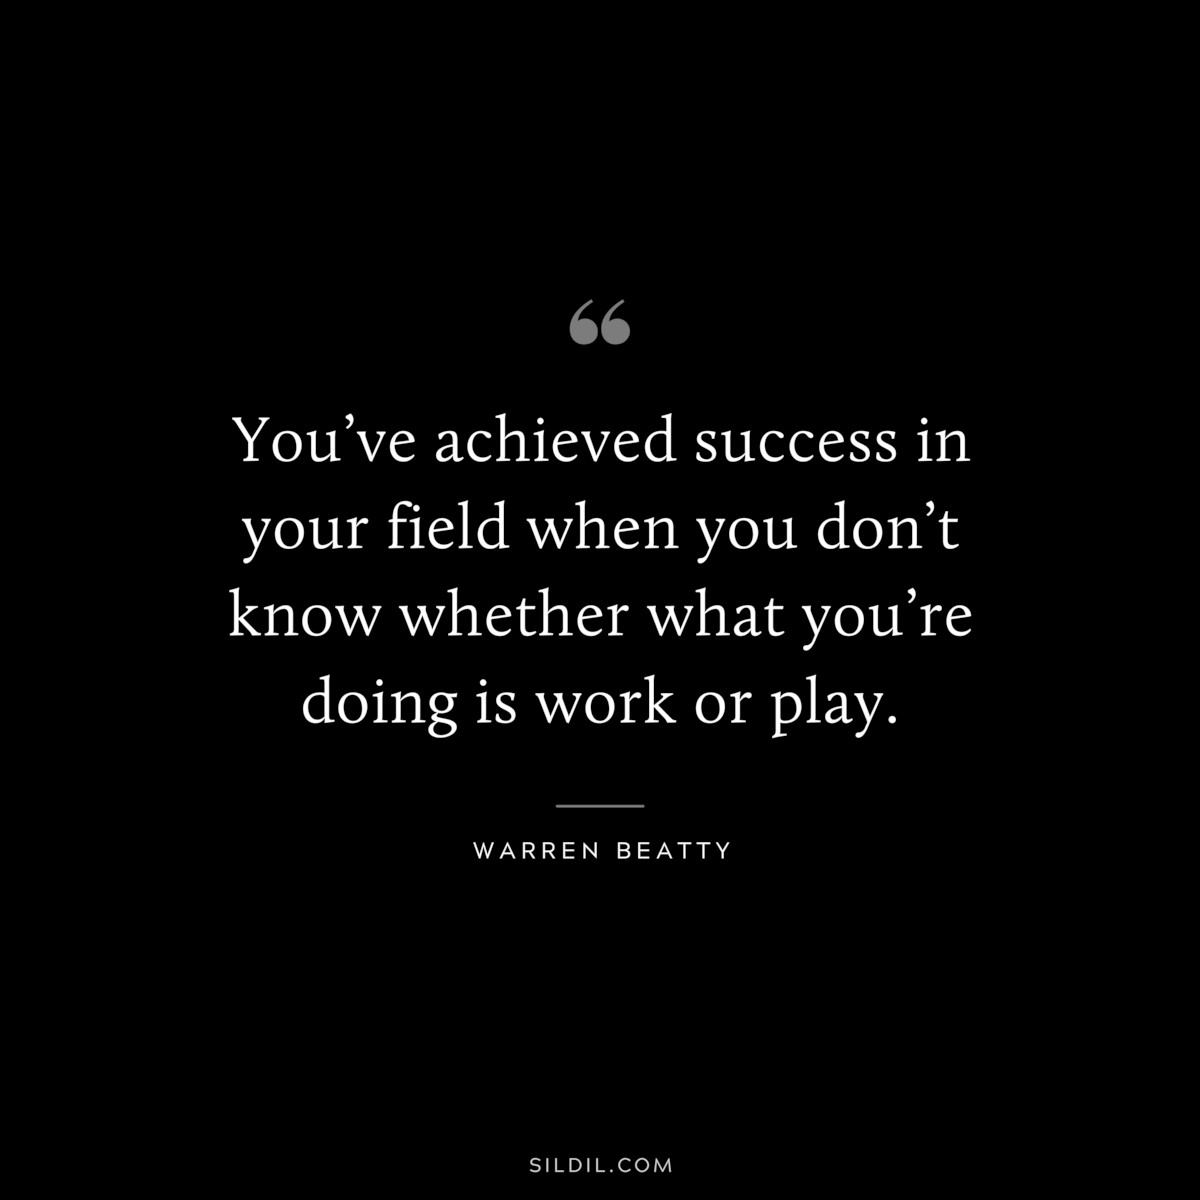 You’ve achieved success in your field when you don’t know whether what you’re doing is work or play. ― Warren Beatty